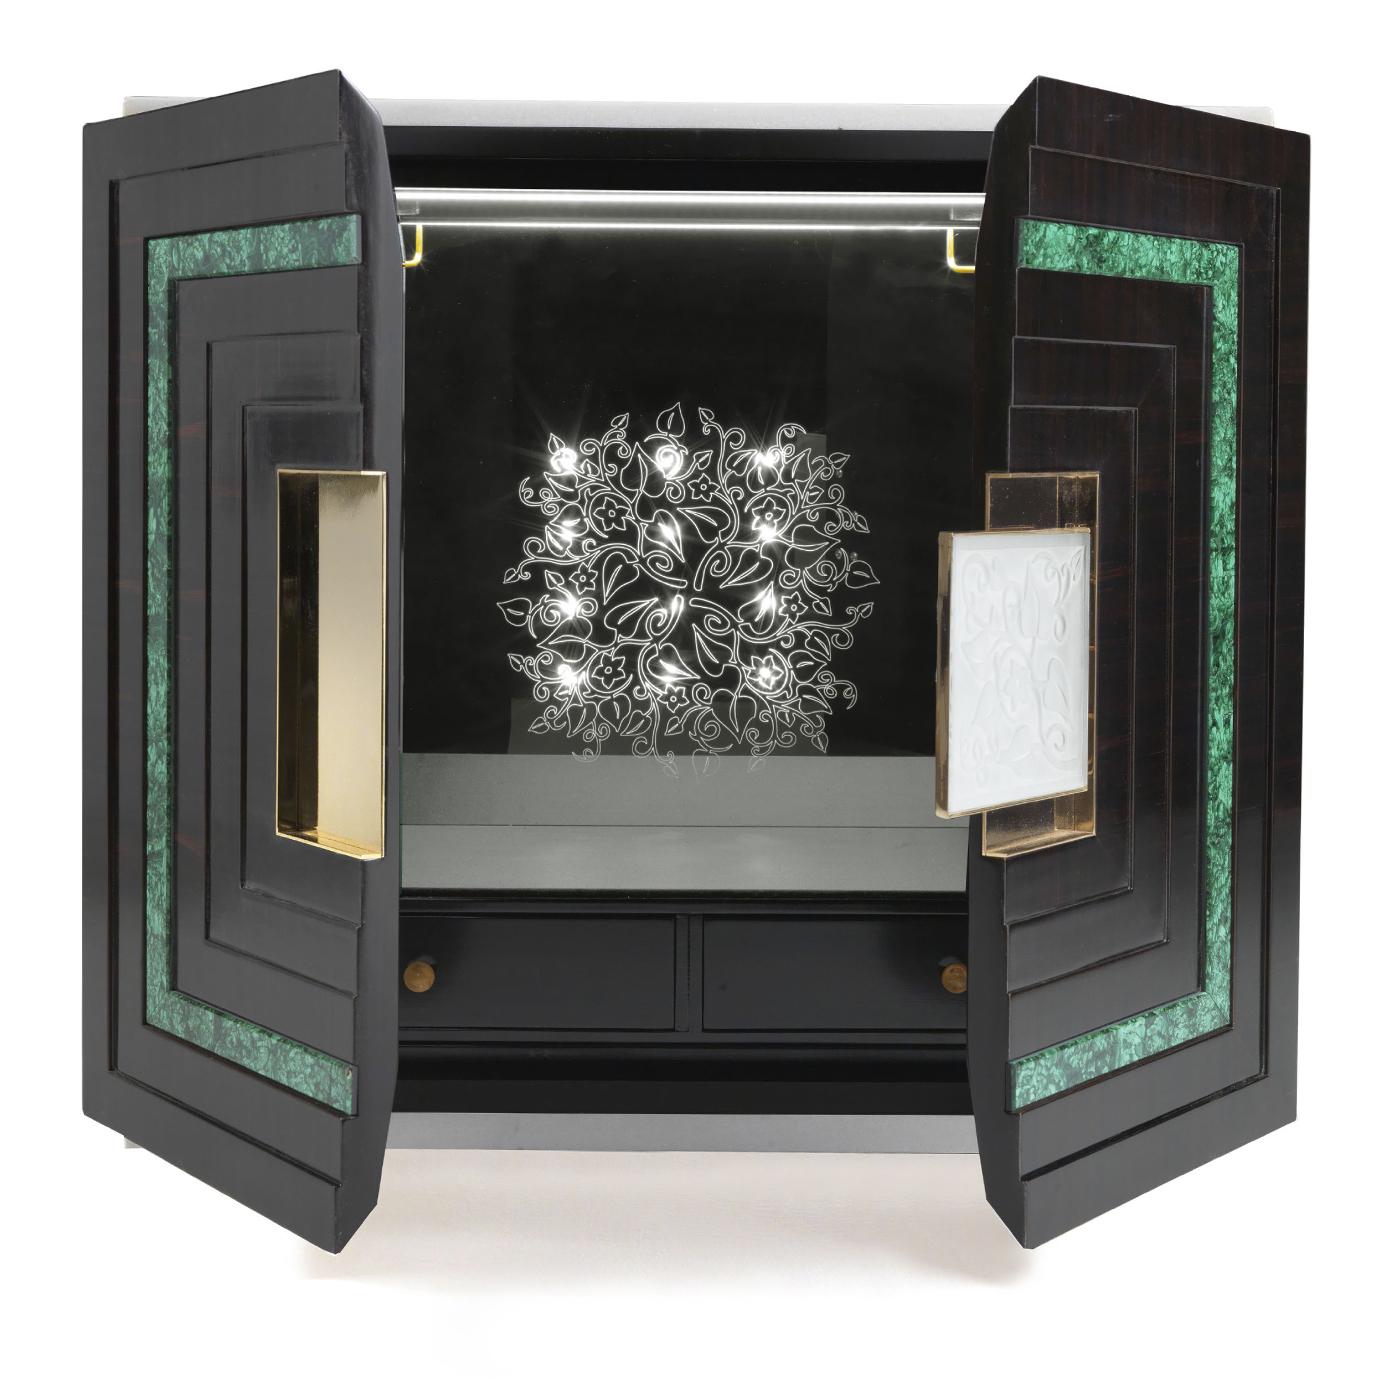 This magnificent cabinet will be a precious addition to a living room and an ideal place to store bottles, glasses, and other necessities to serve drinks. The structure in black nickel features tall and slender legs connected with brass elements and